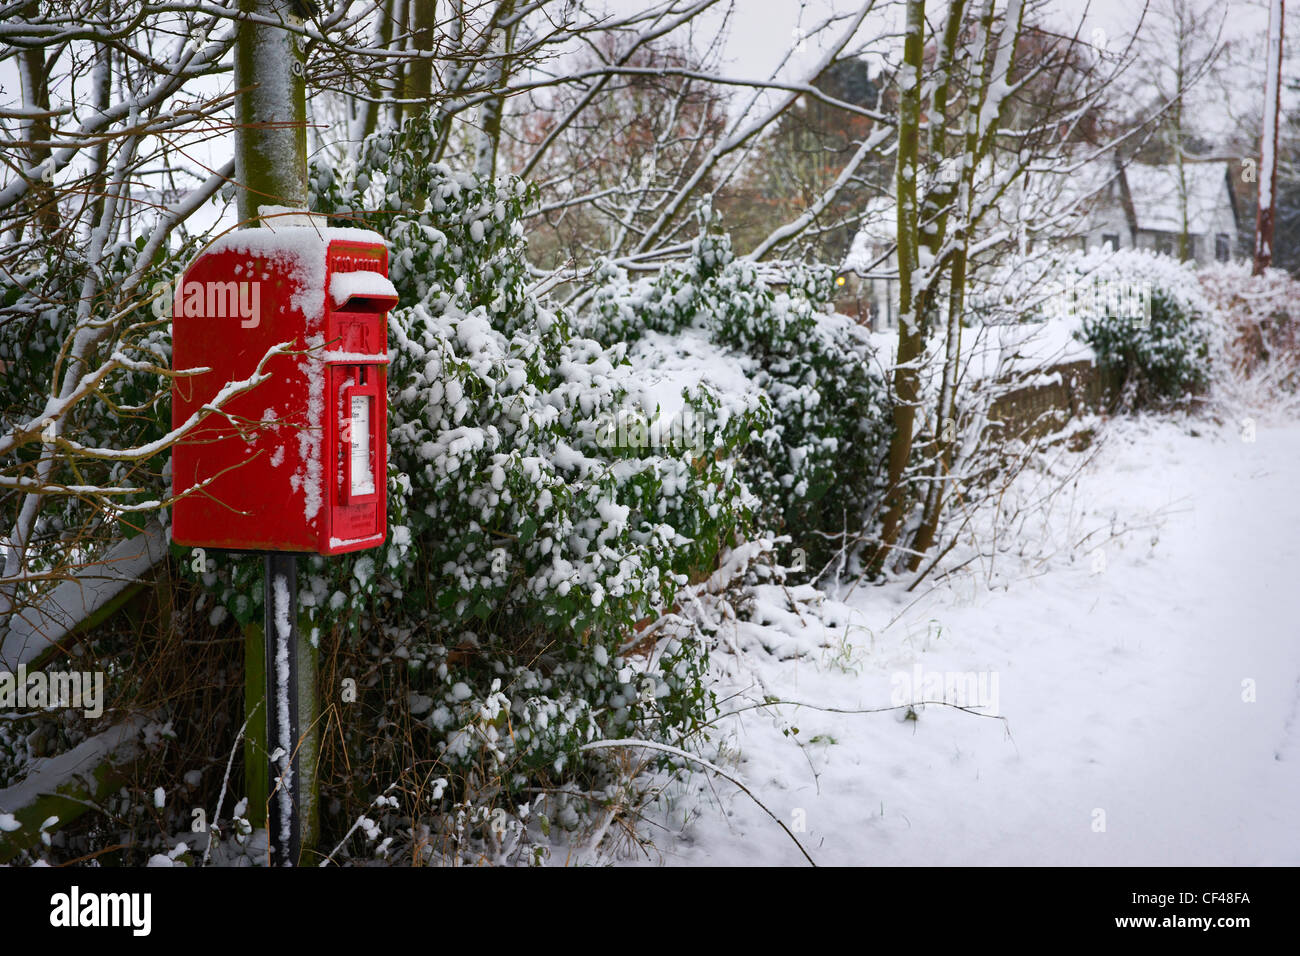 A winter scene with snow covering a red post box in Saffron Walden. Stock Photo